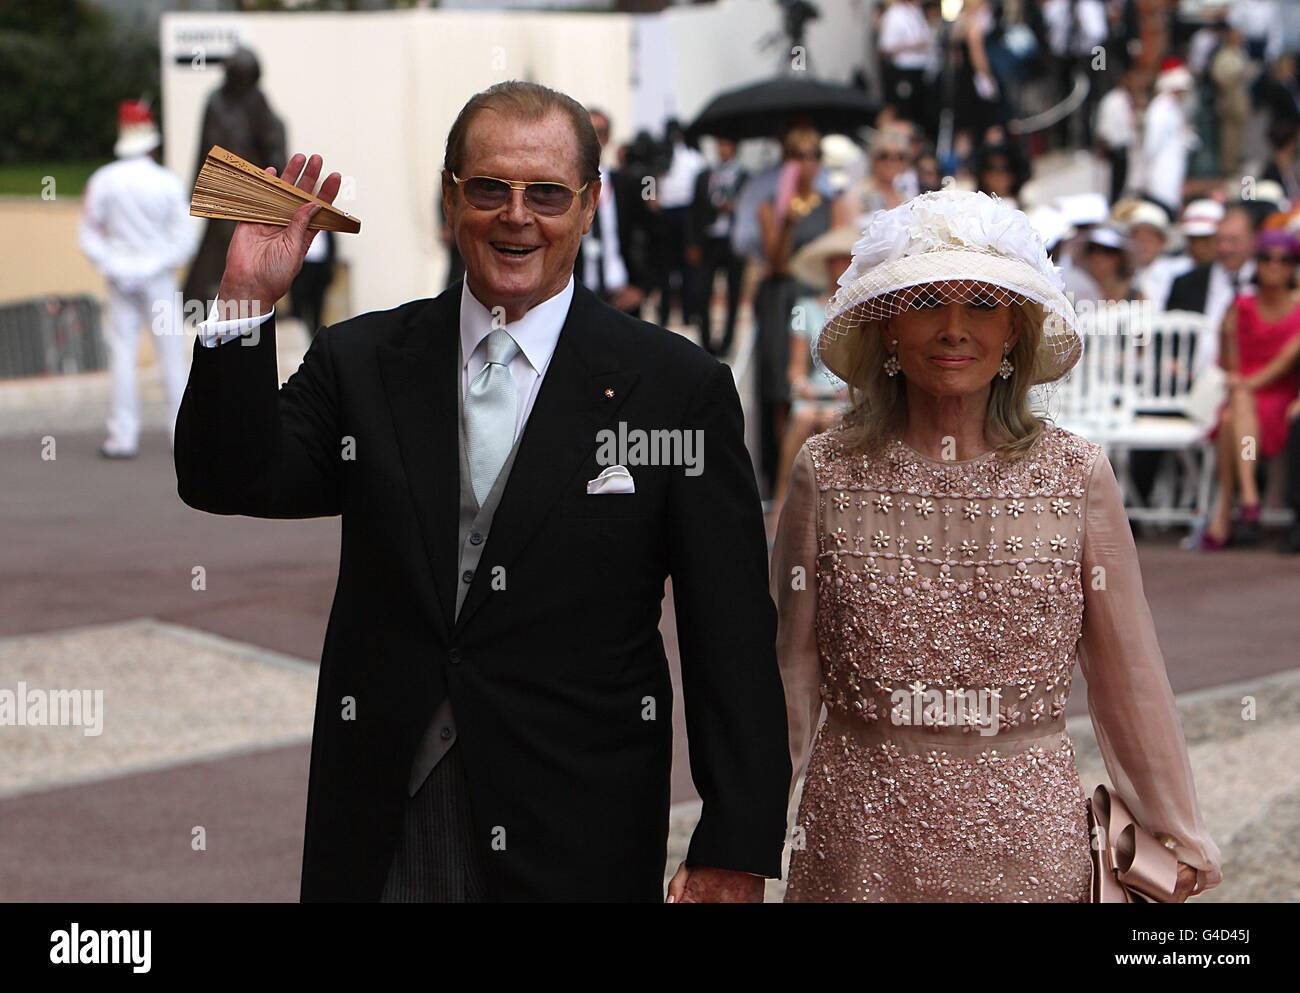 Roger Moore and wife Kristina arriving for the wedding of Prince Albert II of Monaco and Charlene Wittstock at the Place du Palais. Stock Photo